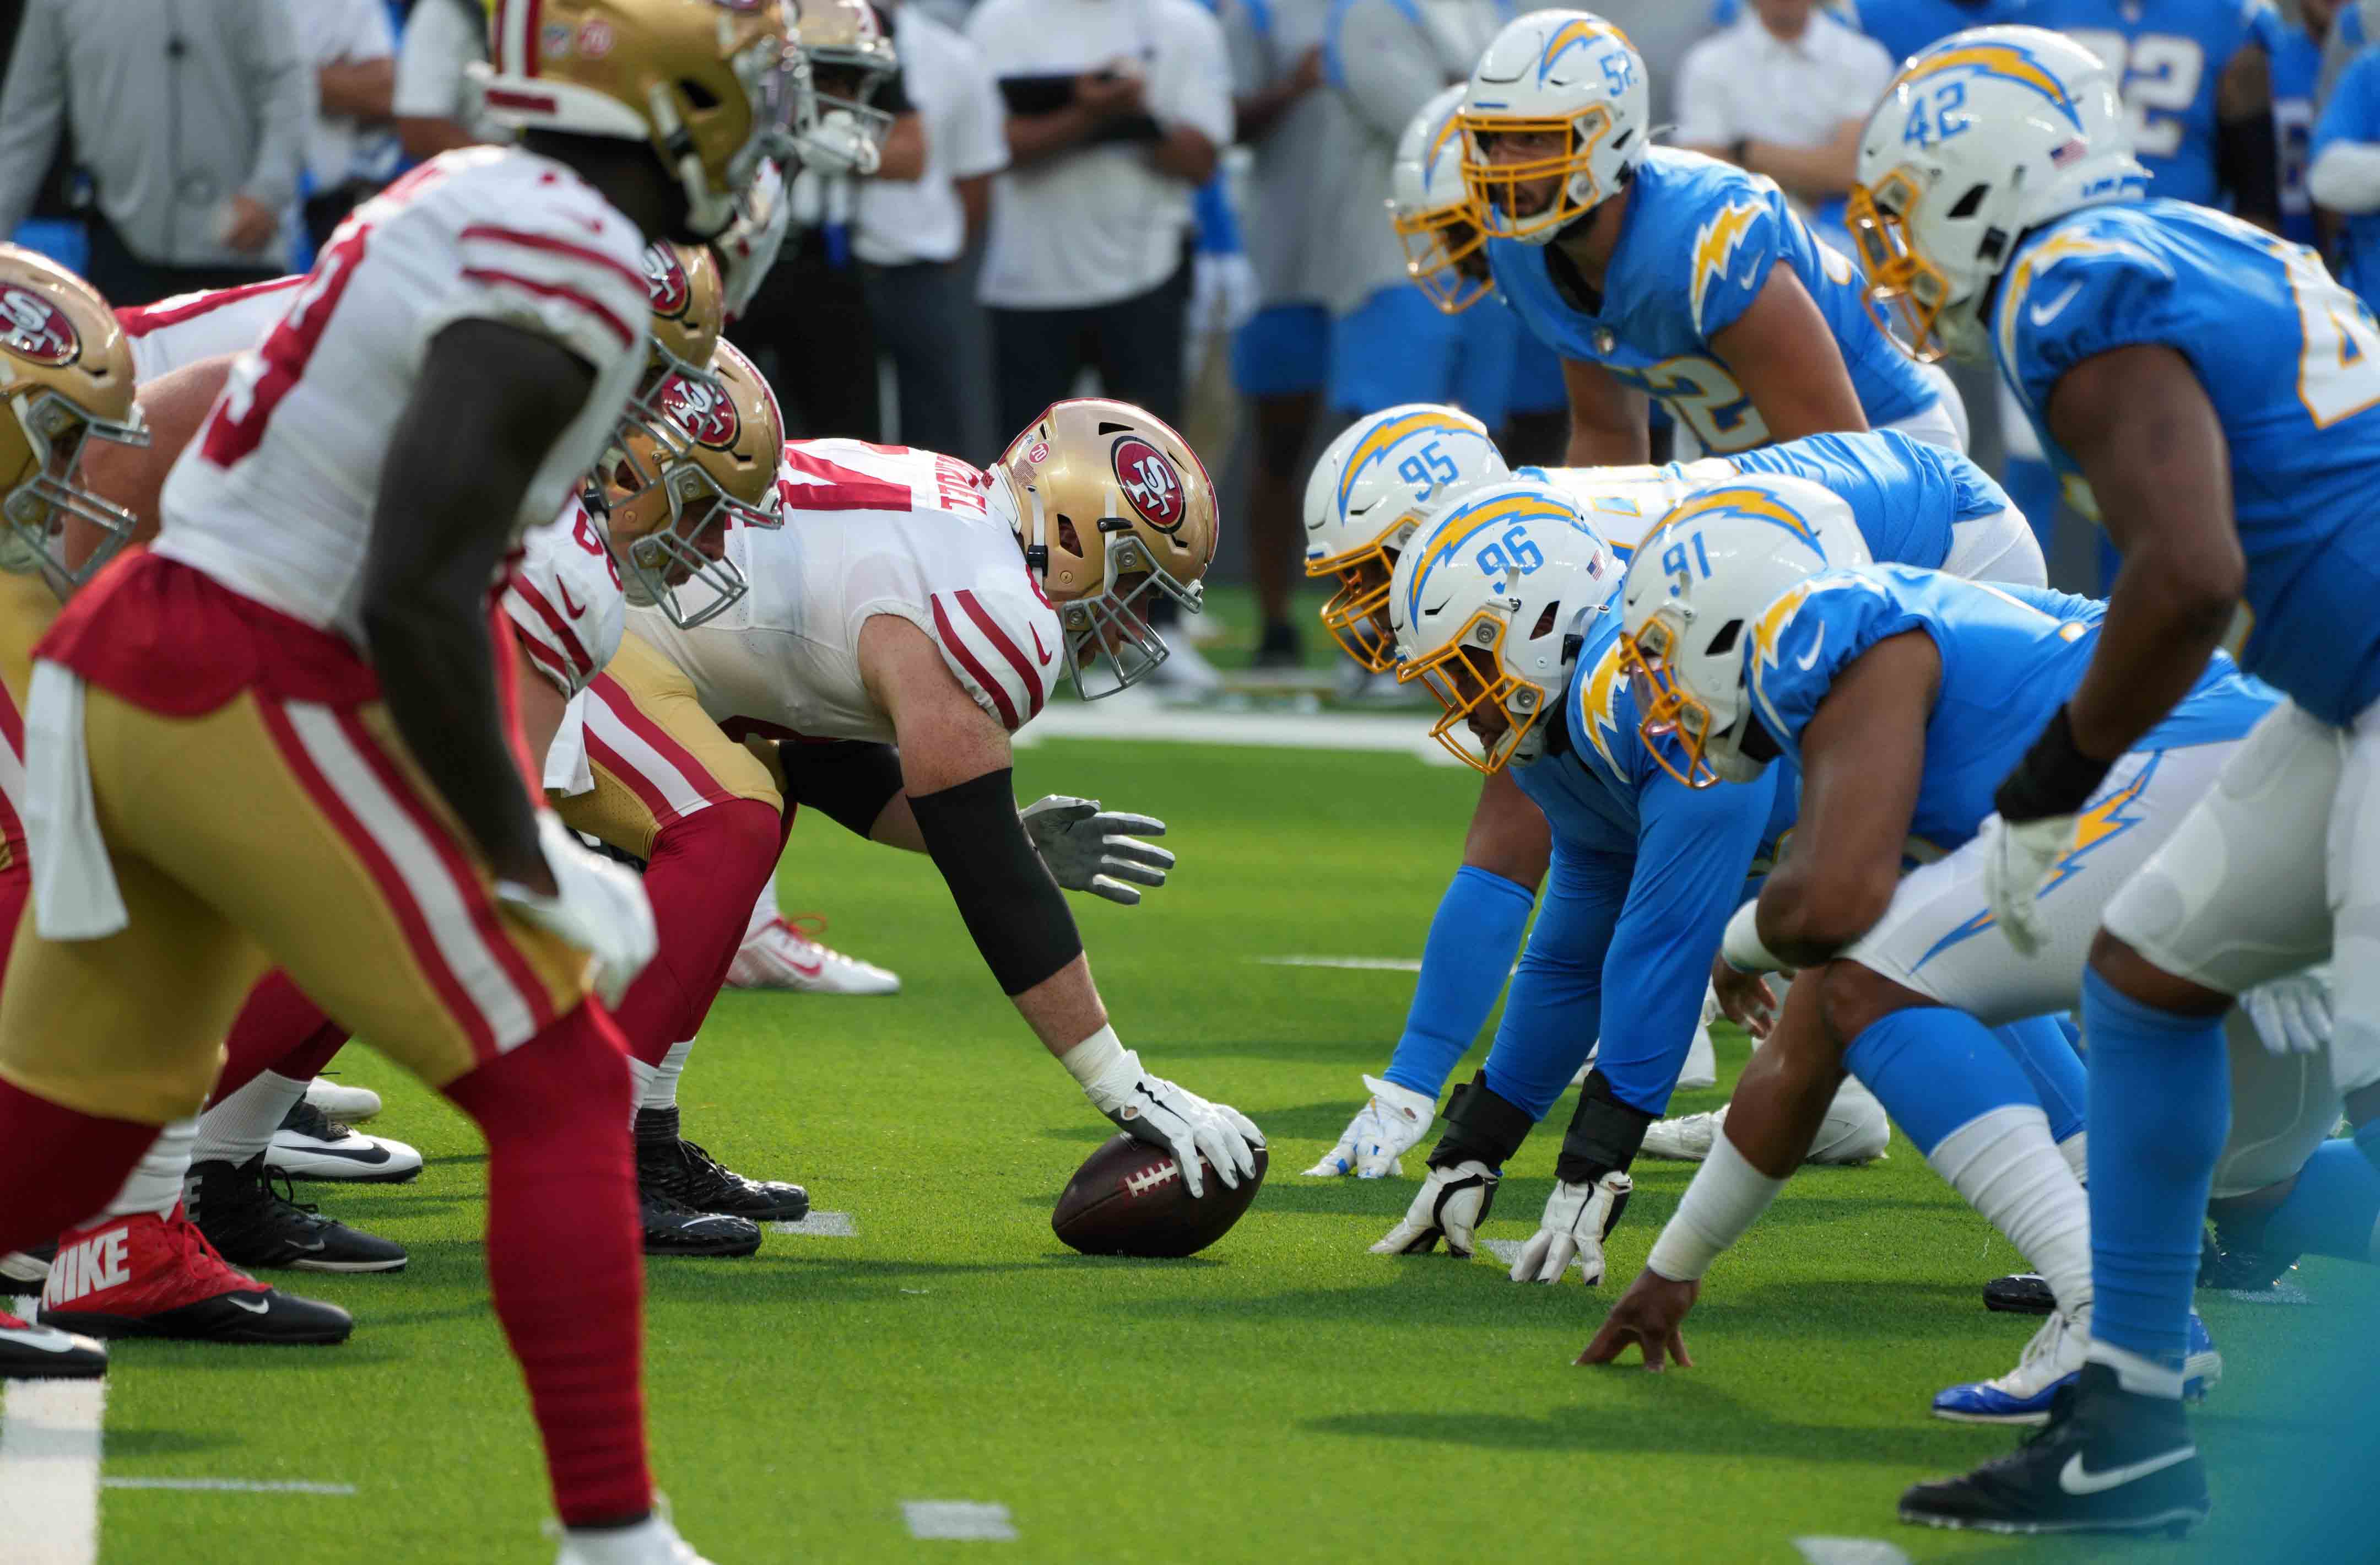 A general overall view of the line of scrimmage as San Francisco 49ers center Jake Brendel (64) snaps the ball against the Los Angeles Chargers at SoFi Stadium.